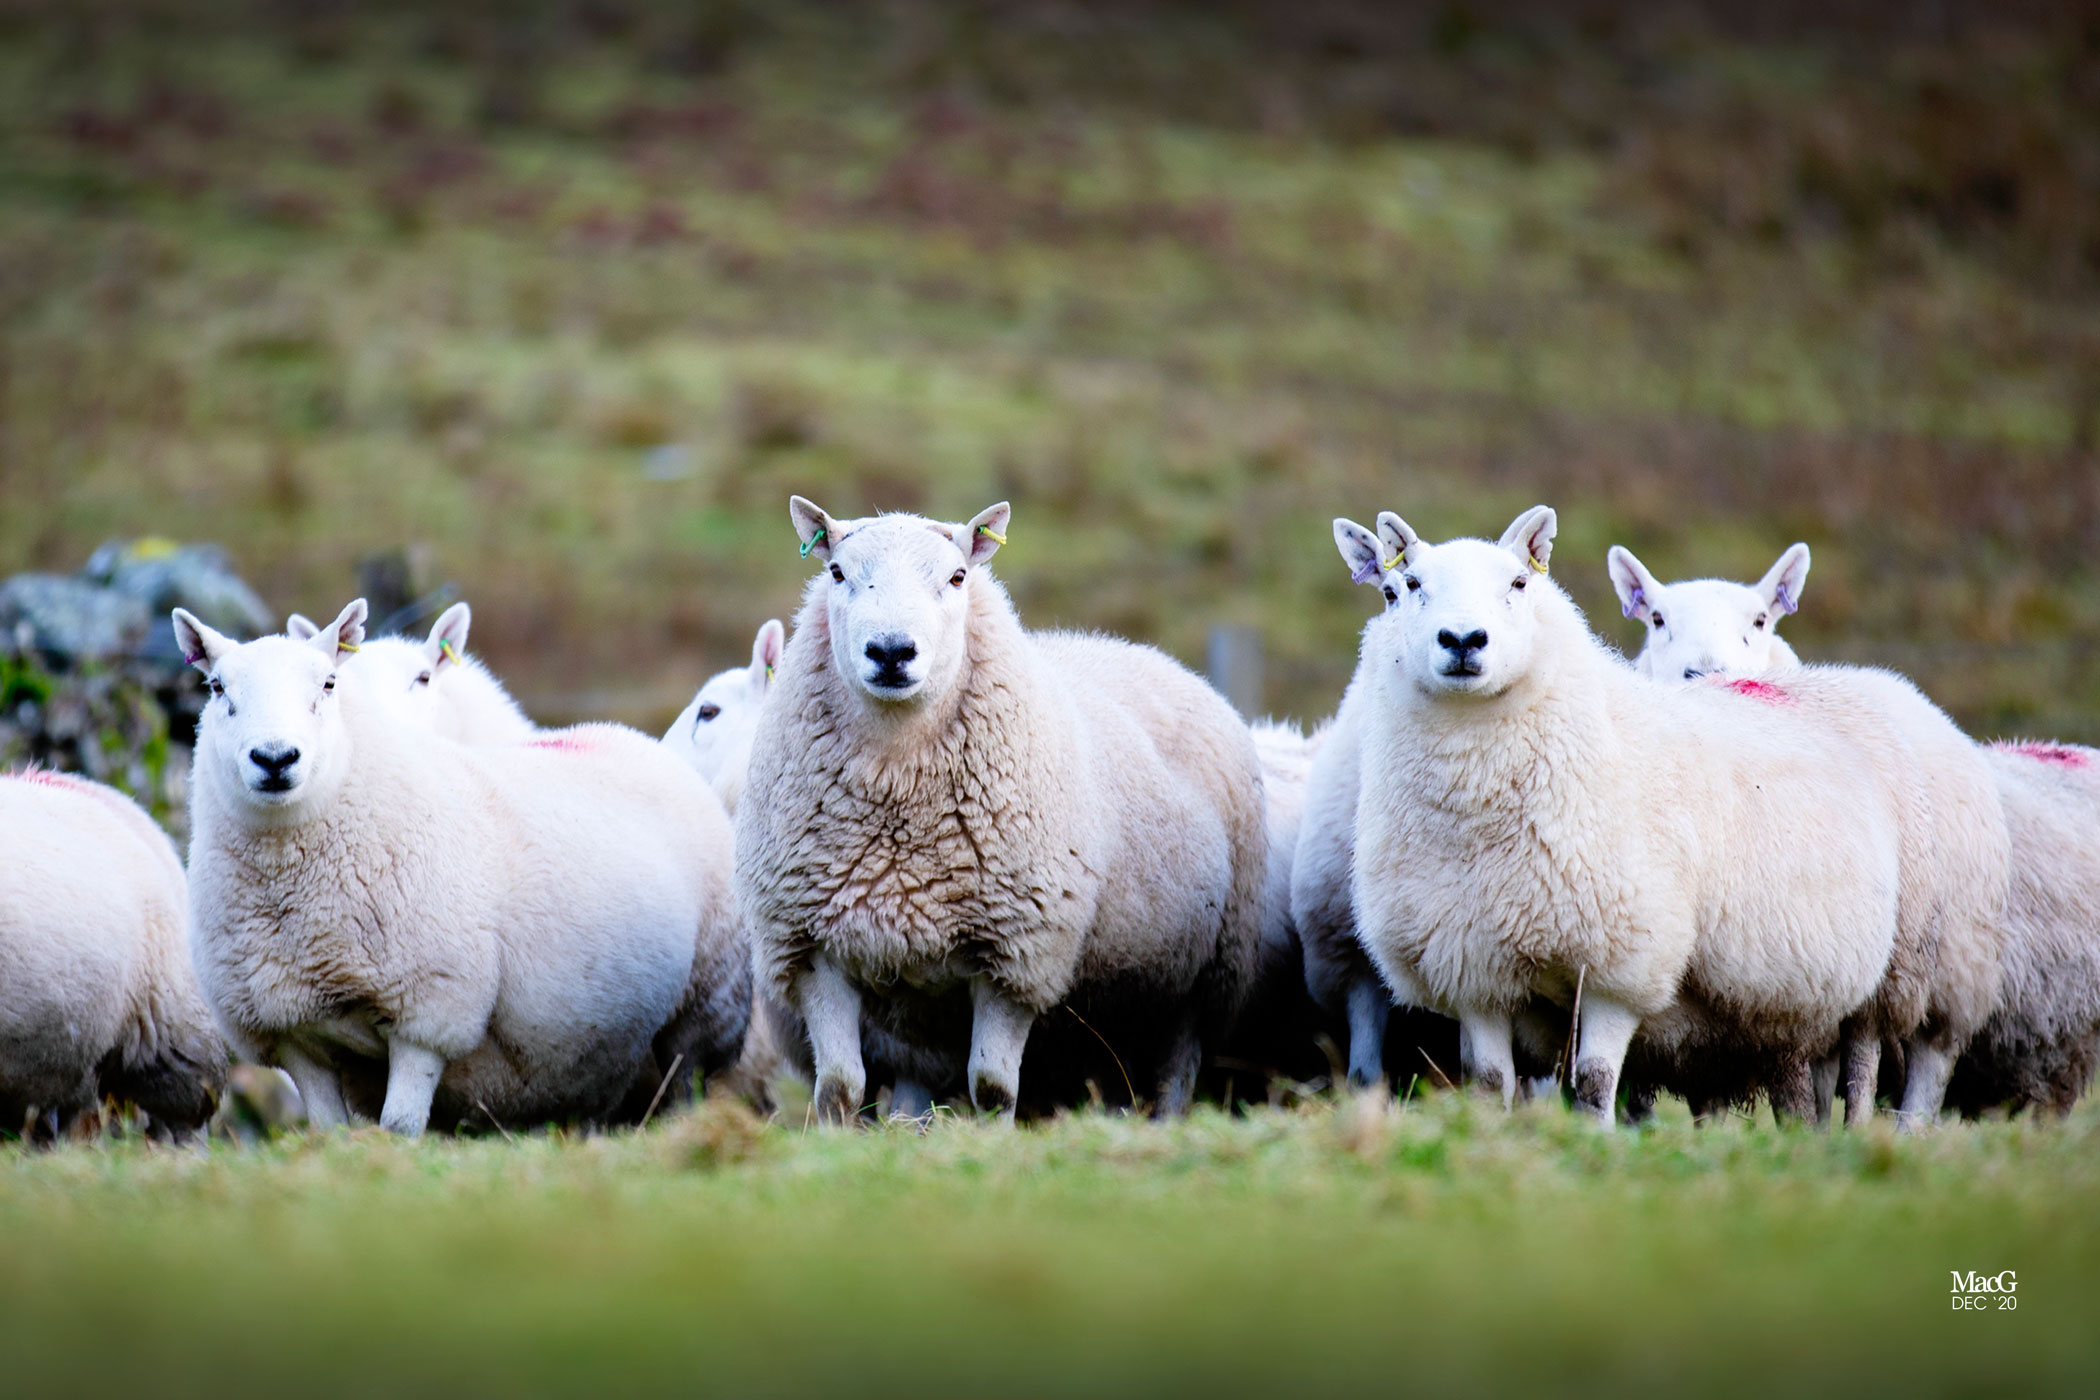 A herd of sheep from our innovative sheep breeding program